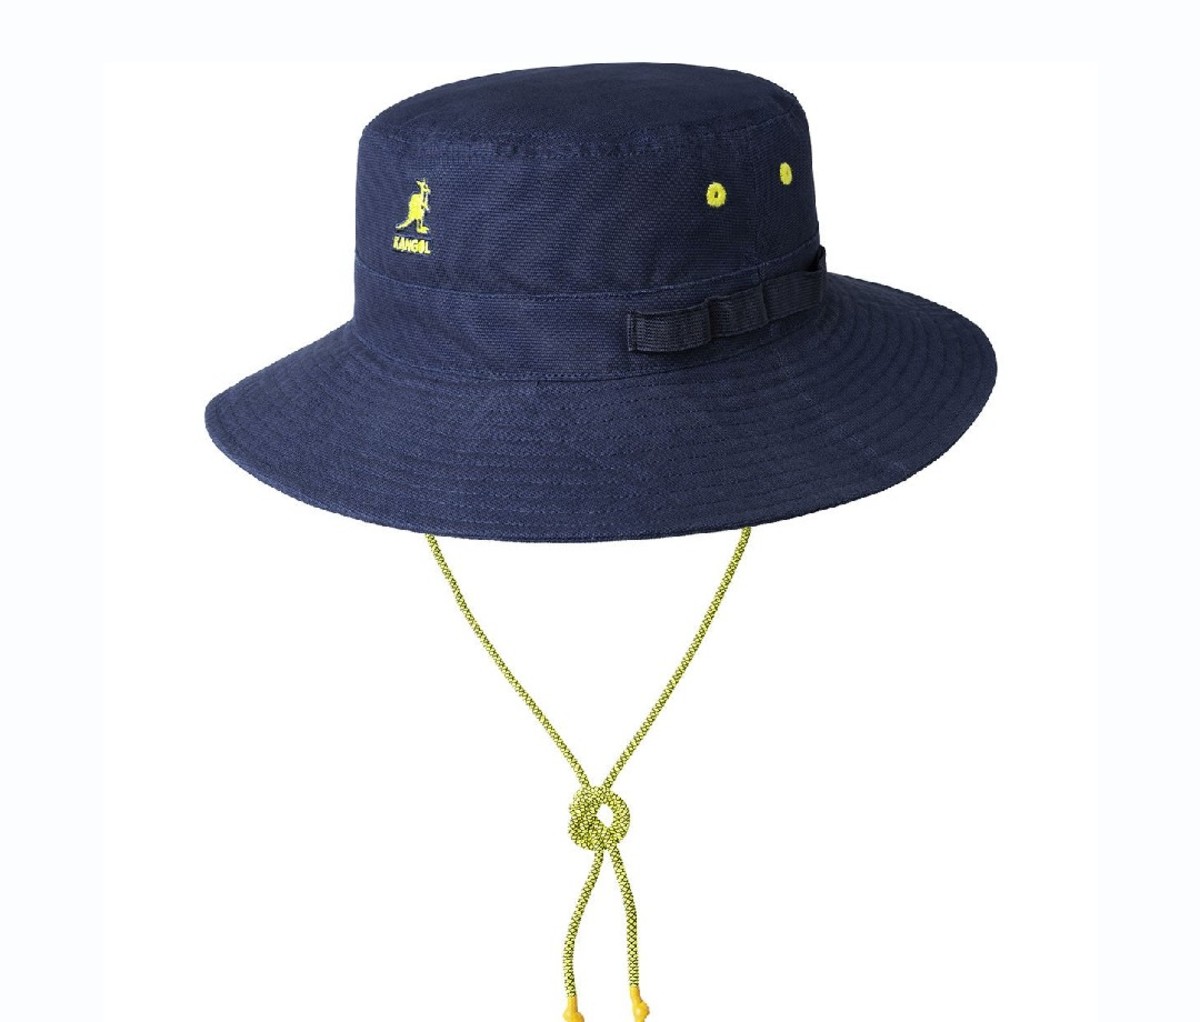 Stylish Bucket Hats for Men to Wear All Summer Long